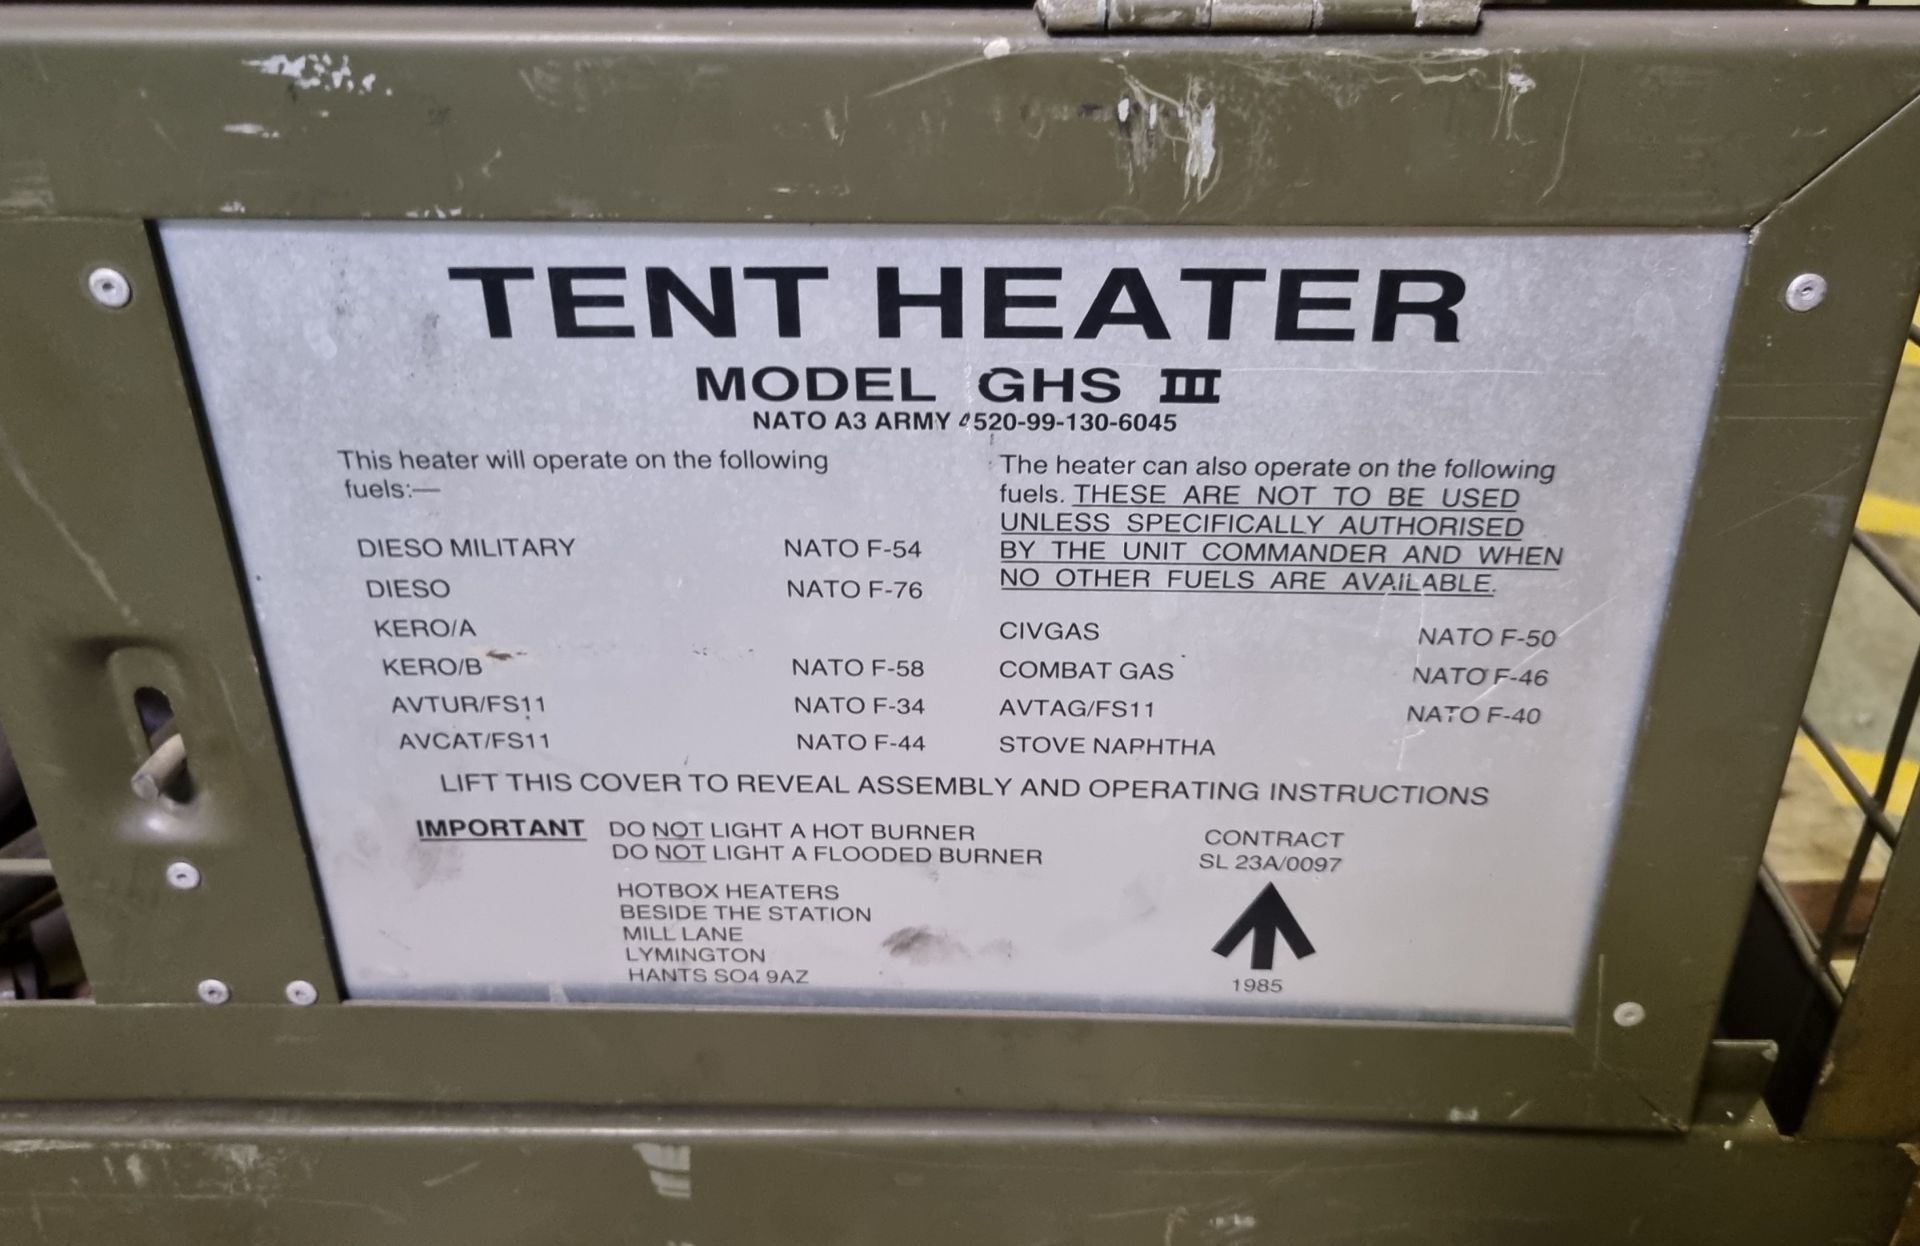 Tent Heater Model GHS 3 - see pictures for accessories - Image 6 of 6